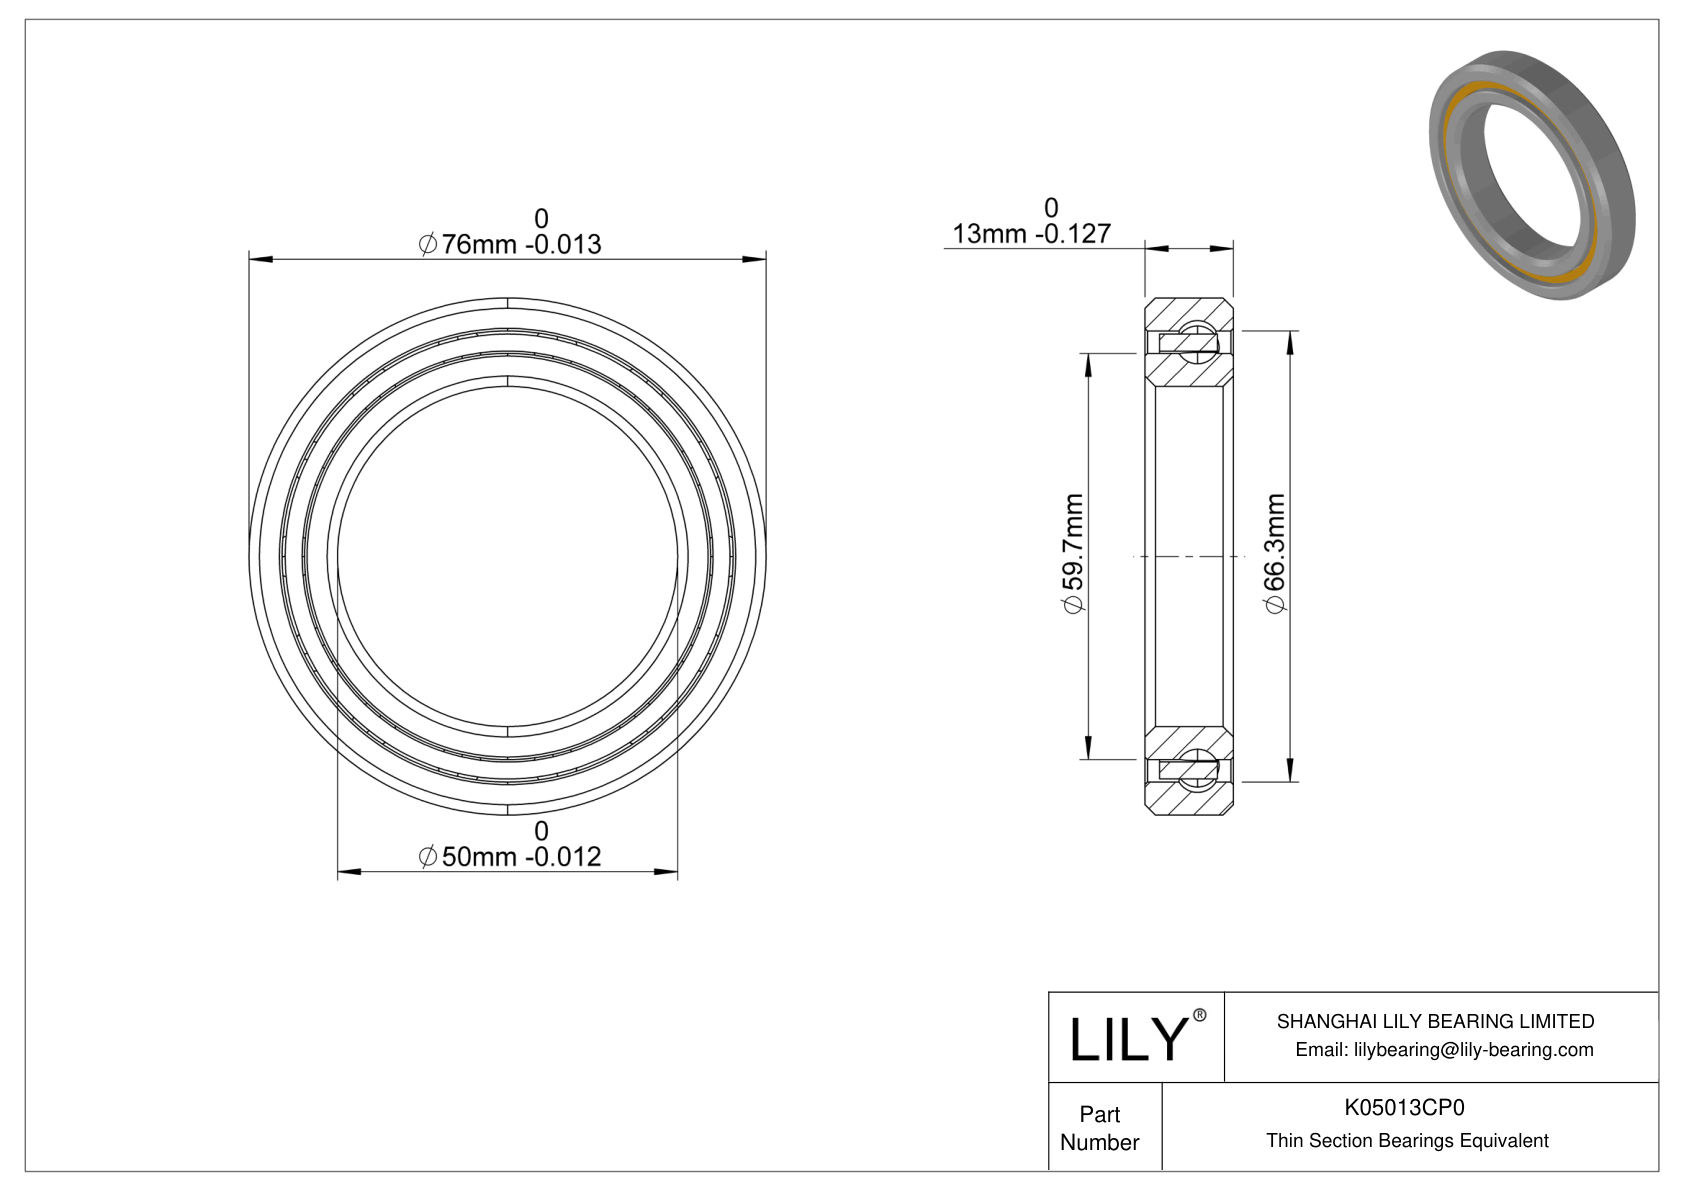 K05013CP0 Constant Section (CS) Bearings cad drawing